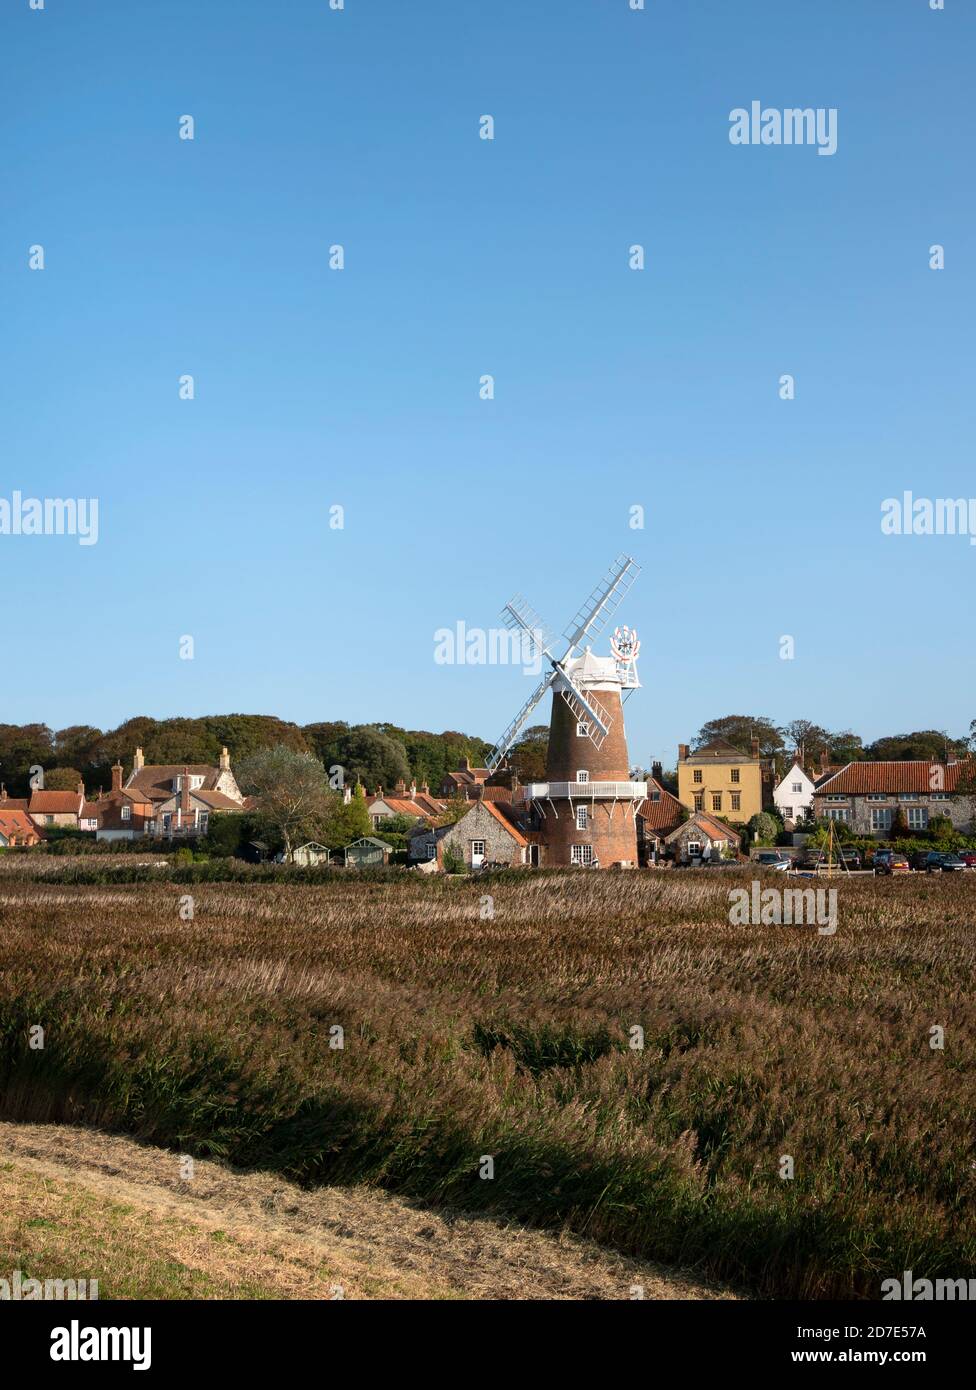 Cley windmill, Cley next the Sea, Norfolk, East Anglia, England, UK. Stock Photo